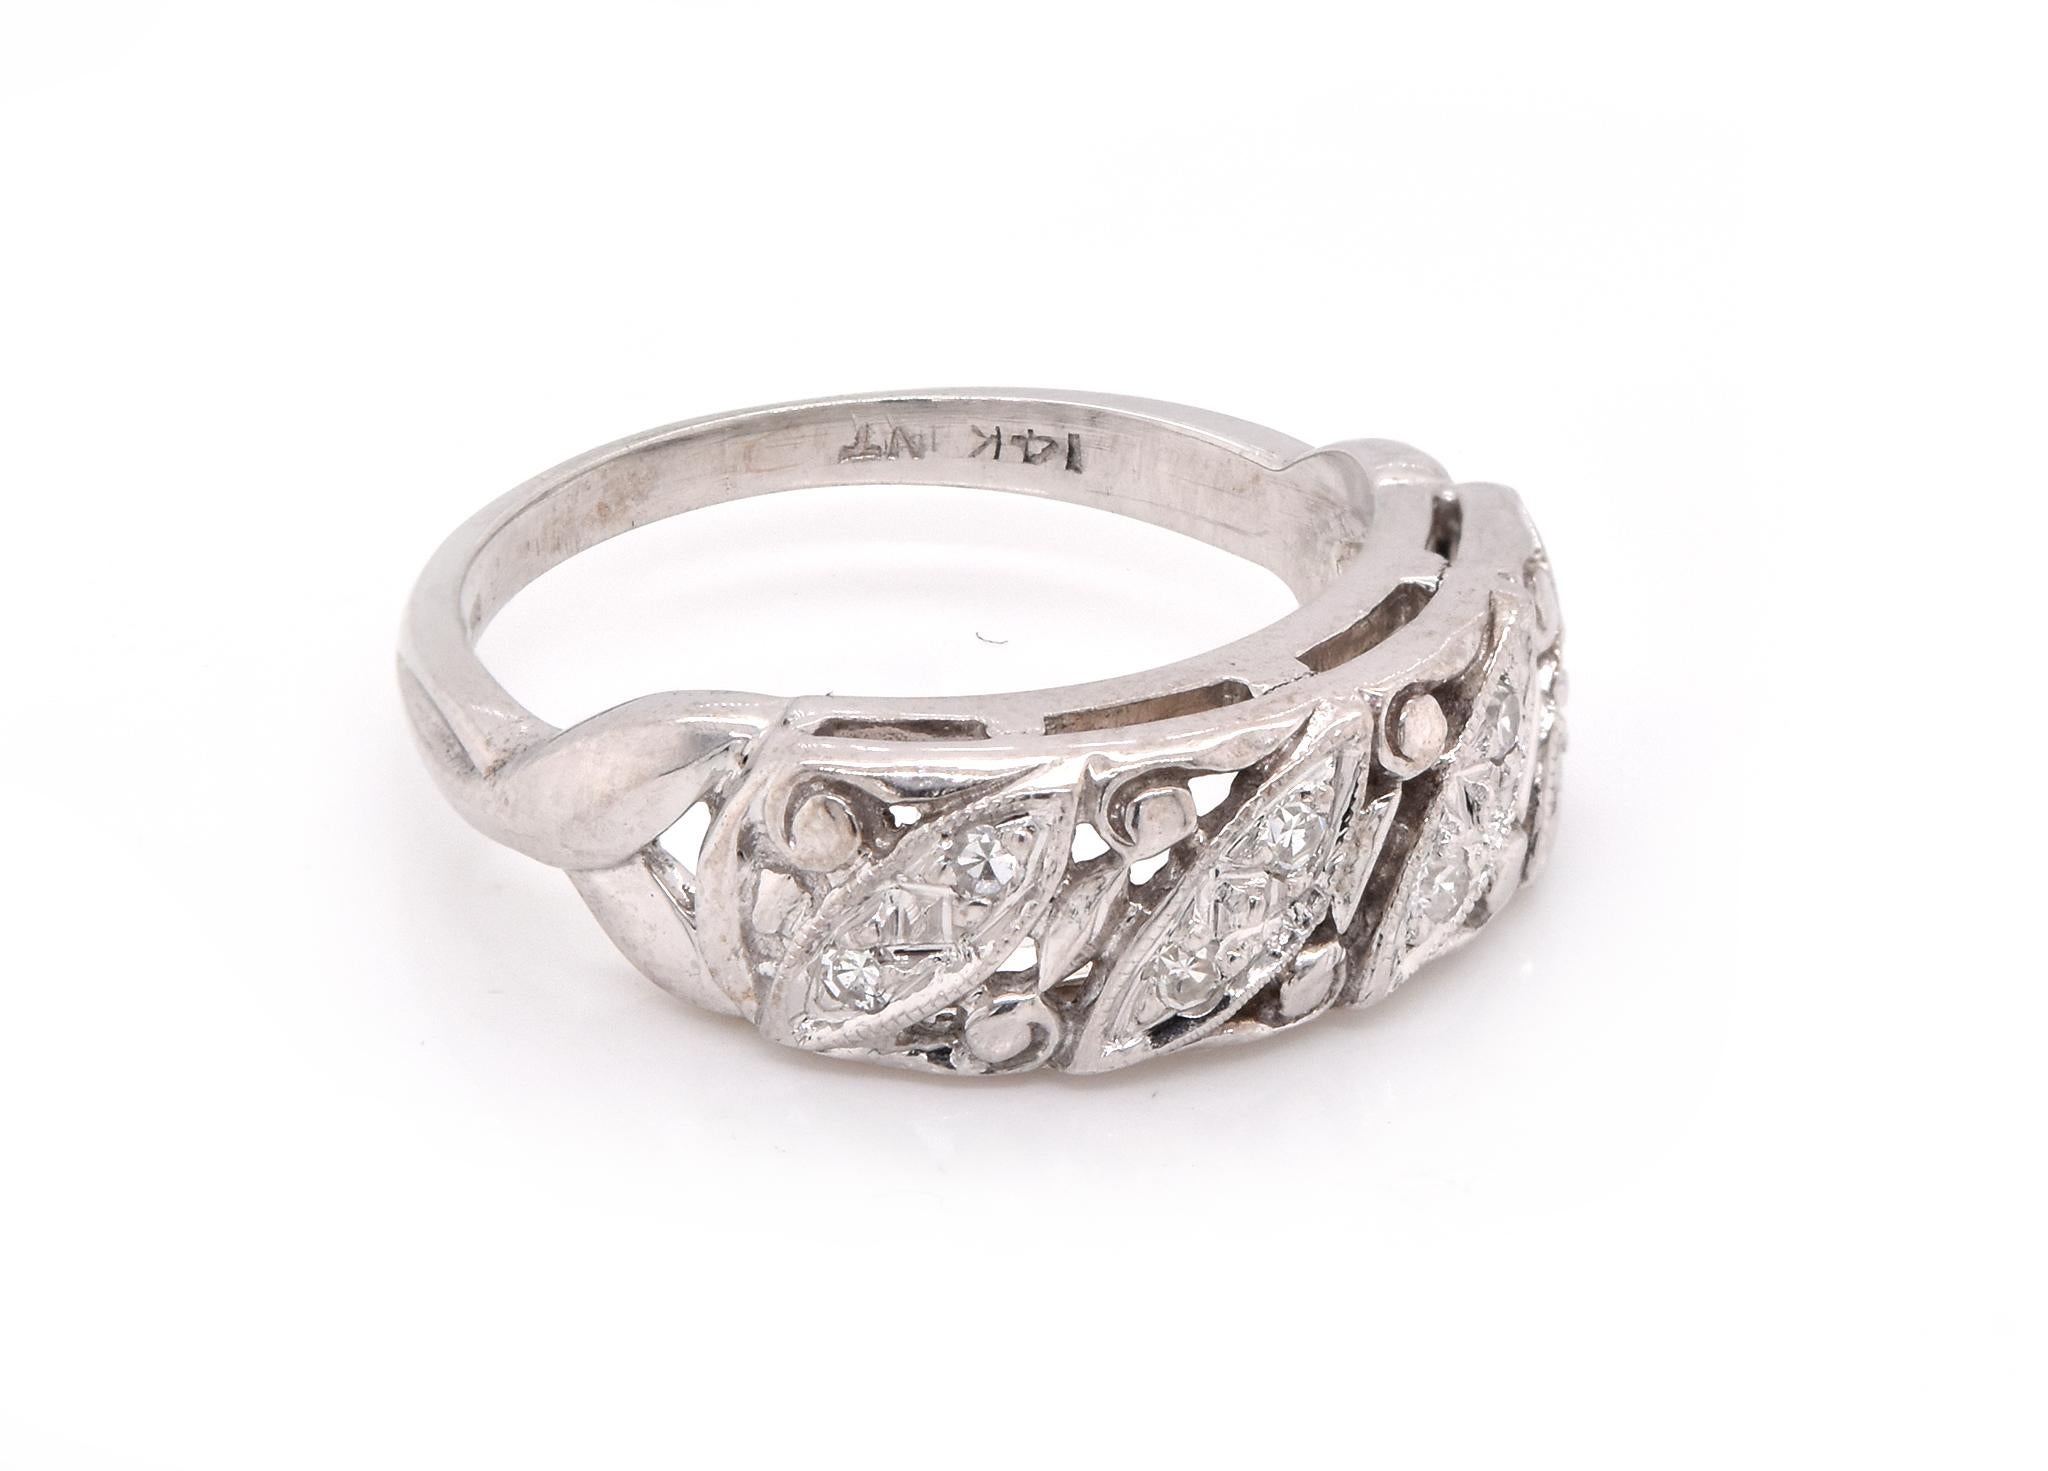 Designer: custom
Material: 14K white gold
Diamonds: 8 round cut = .10cttw
Color: H
Clarity: SI1
Ring size: 6 (please allow two additional shipping days for sizing requests)
Dimensions: ring top is 6.15mm wide 
Weight:  3.58 grams 
